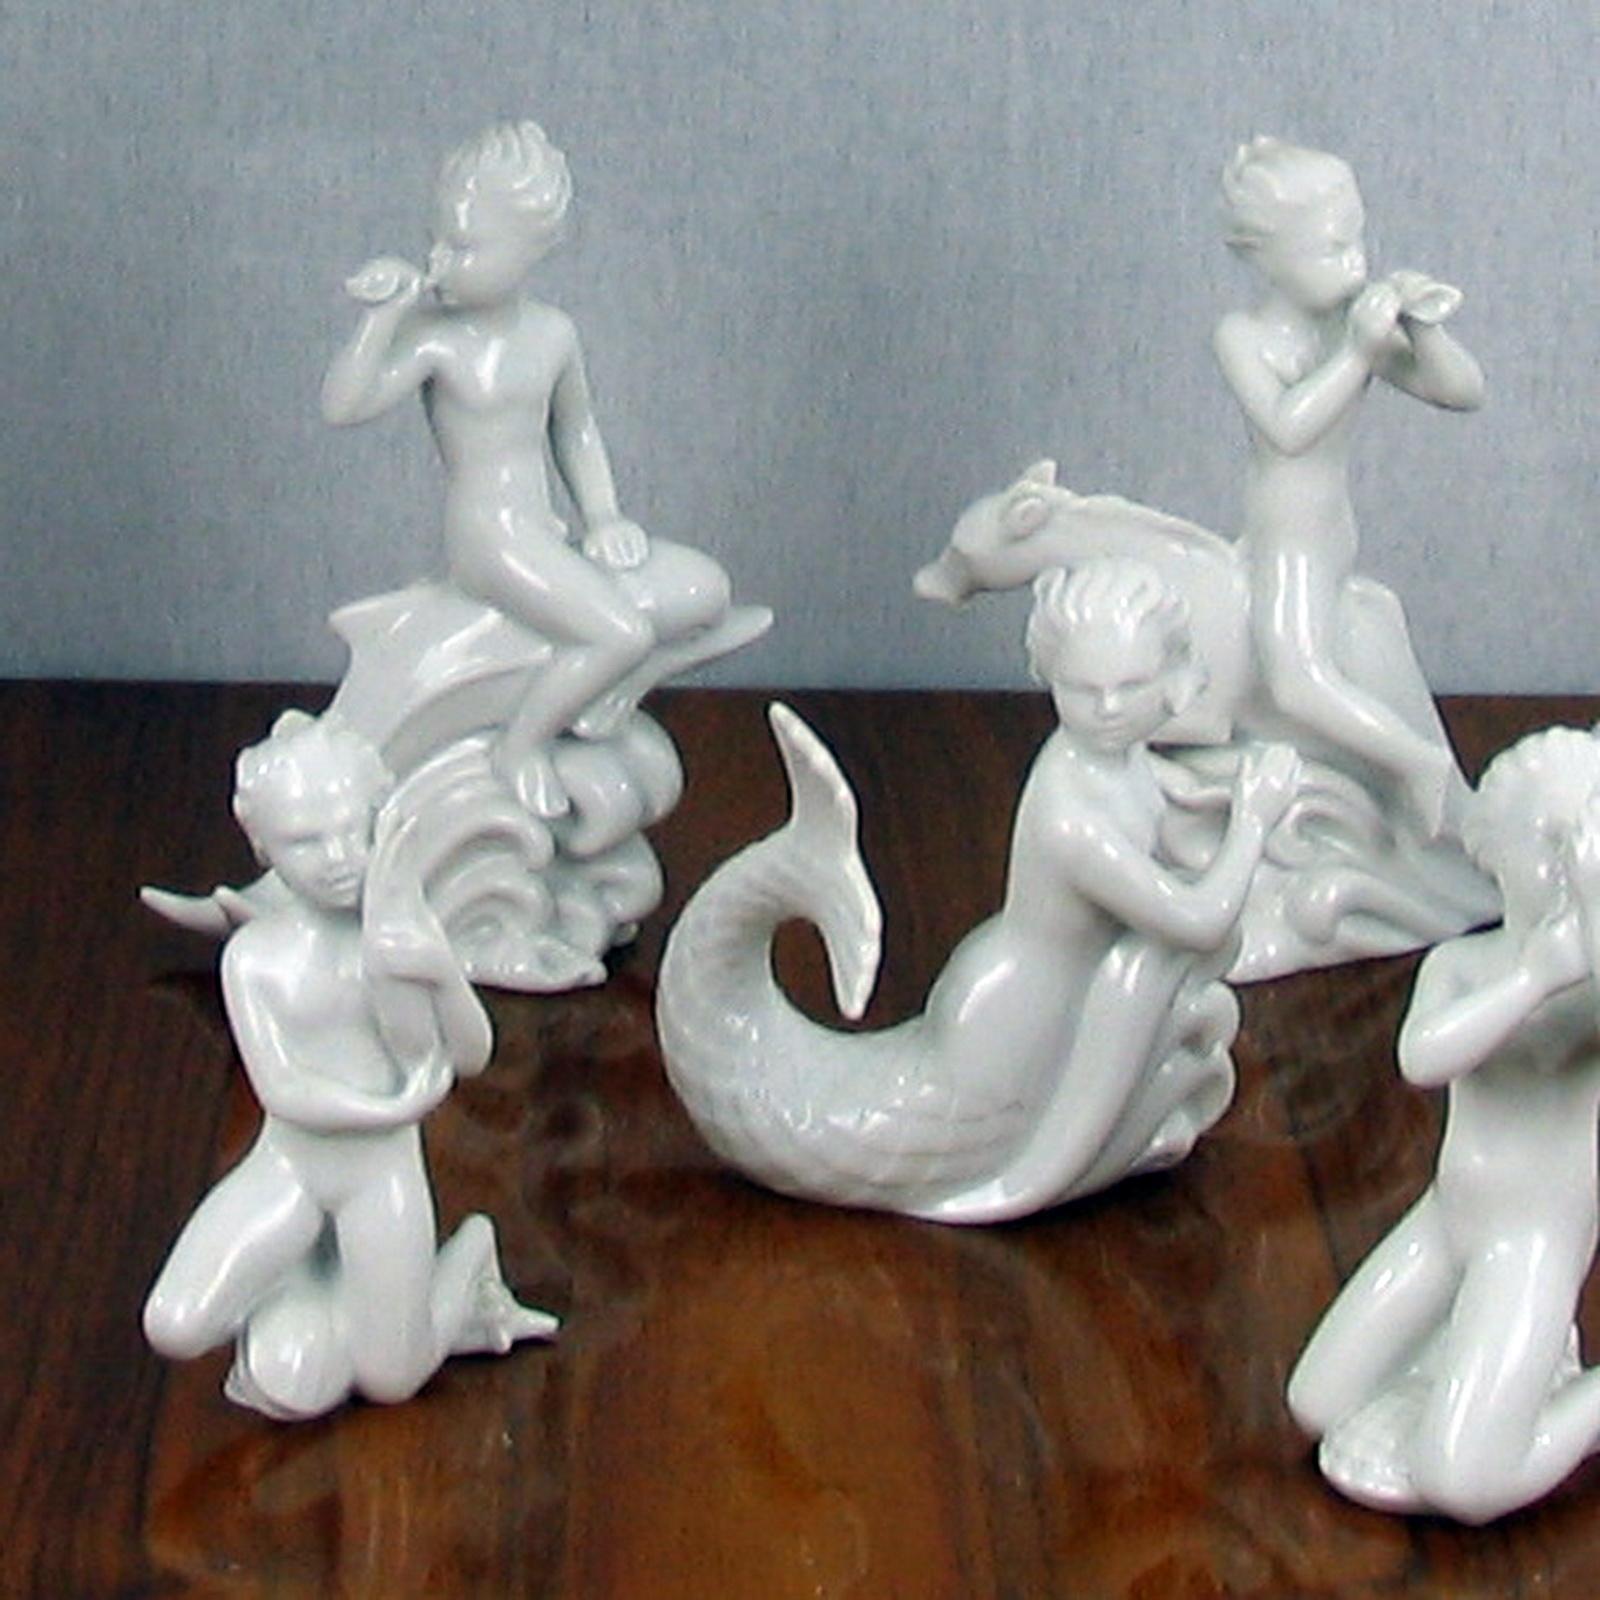 Harald Salomon for Rörstrand, Blanc de Chine white glazed set of six figurines
Figurines in hard paste porcelain blanche de chine, depicting fantastic sea characters, designed by Harald Salomon 1943-1945. All figurines in excellent condition.